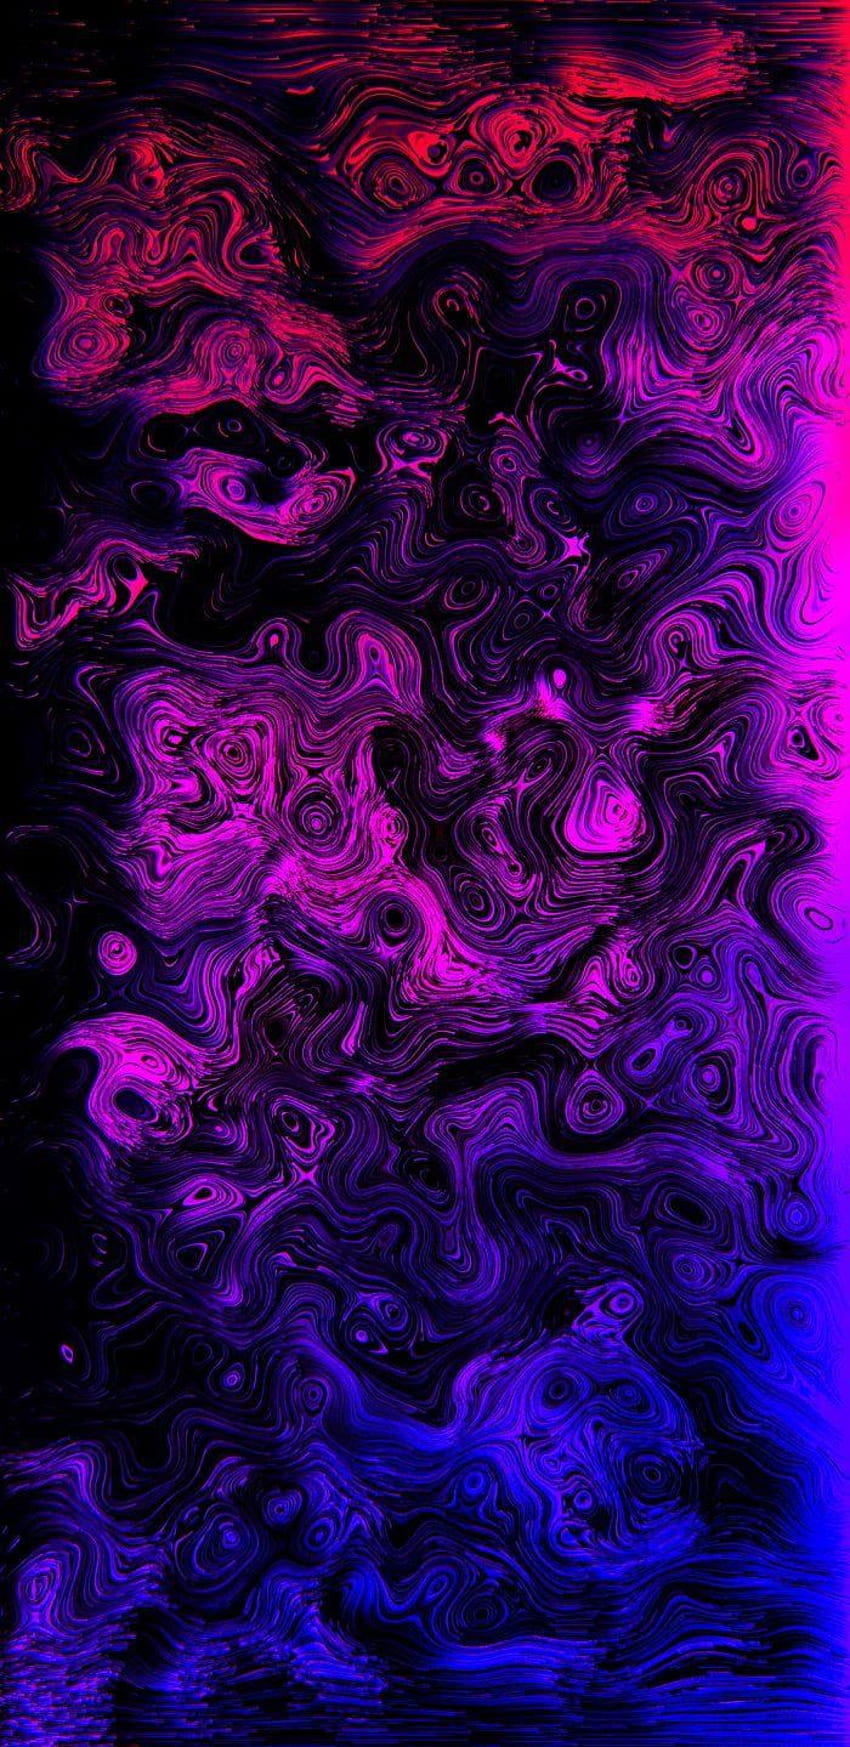 Send your best - . Artistic , Trippy , Android , AMOLED HD phone wallpaper